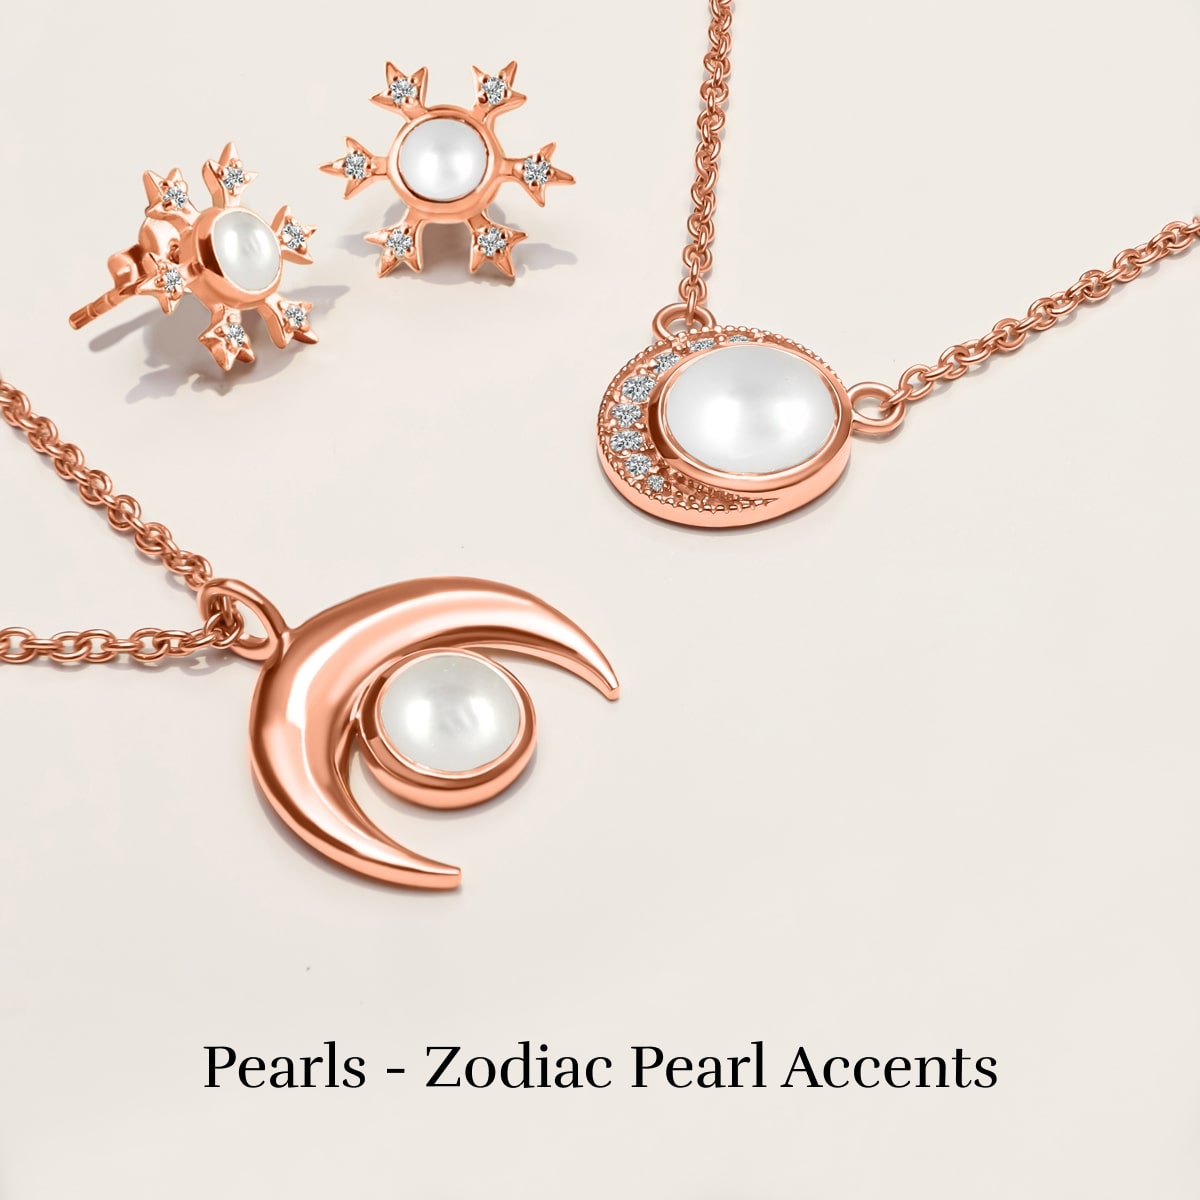 Zodiac sign associated with pearls